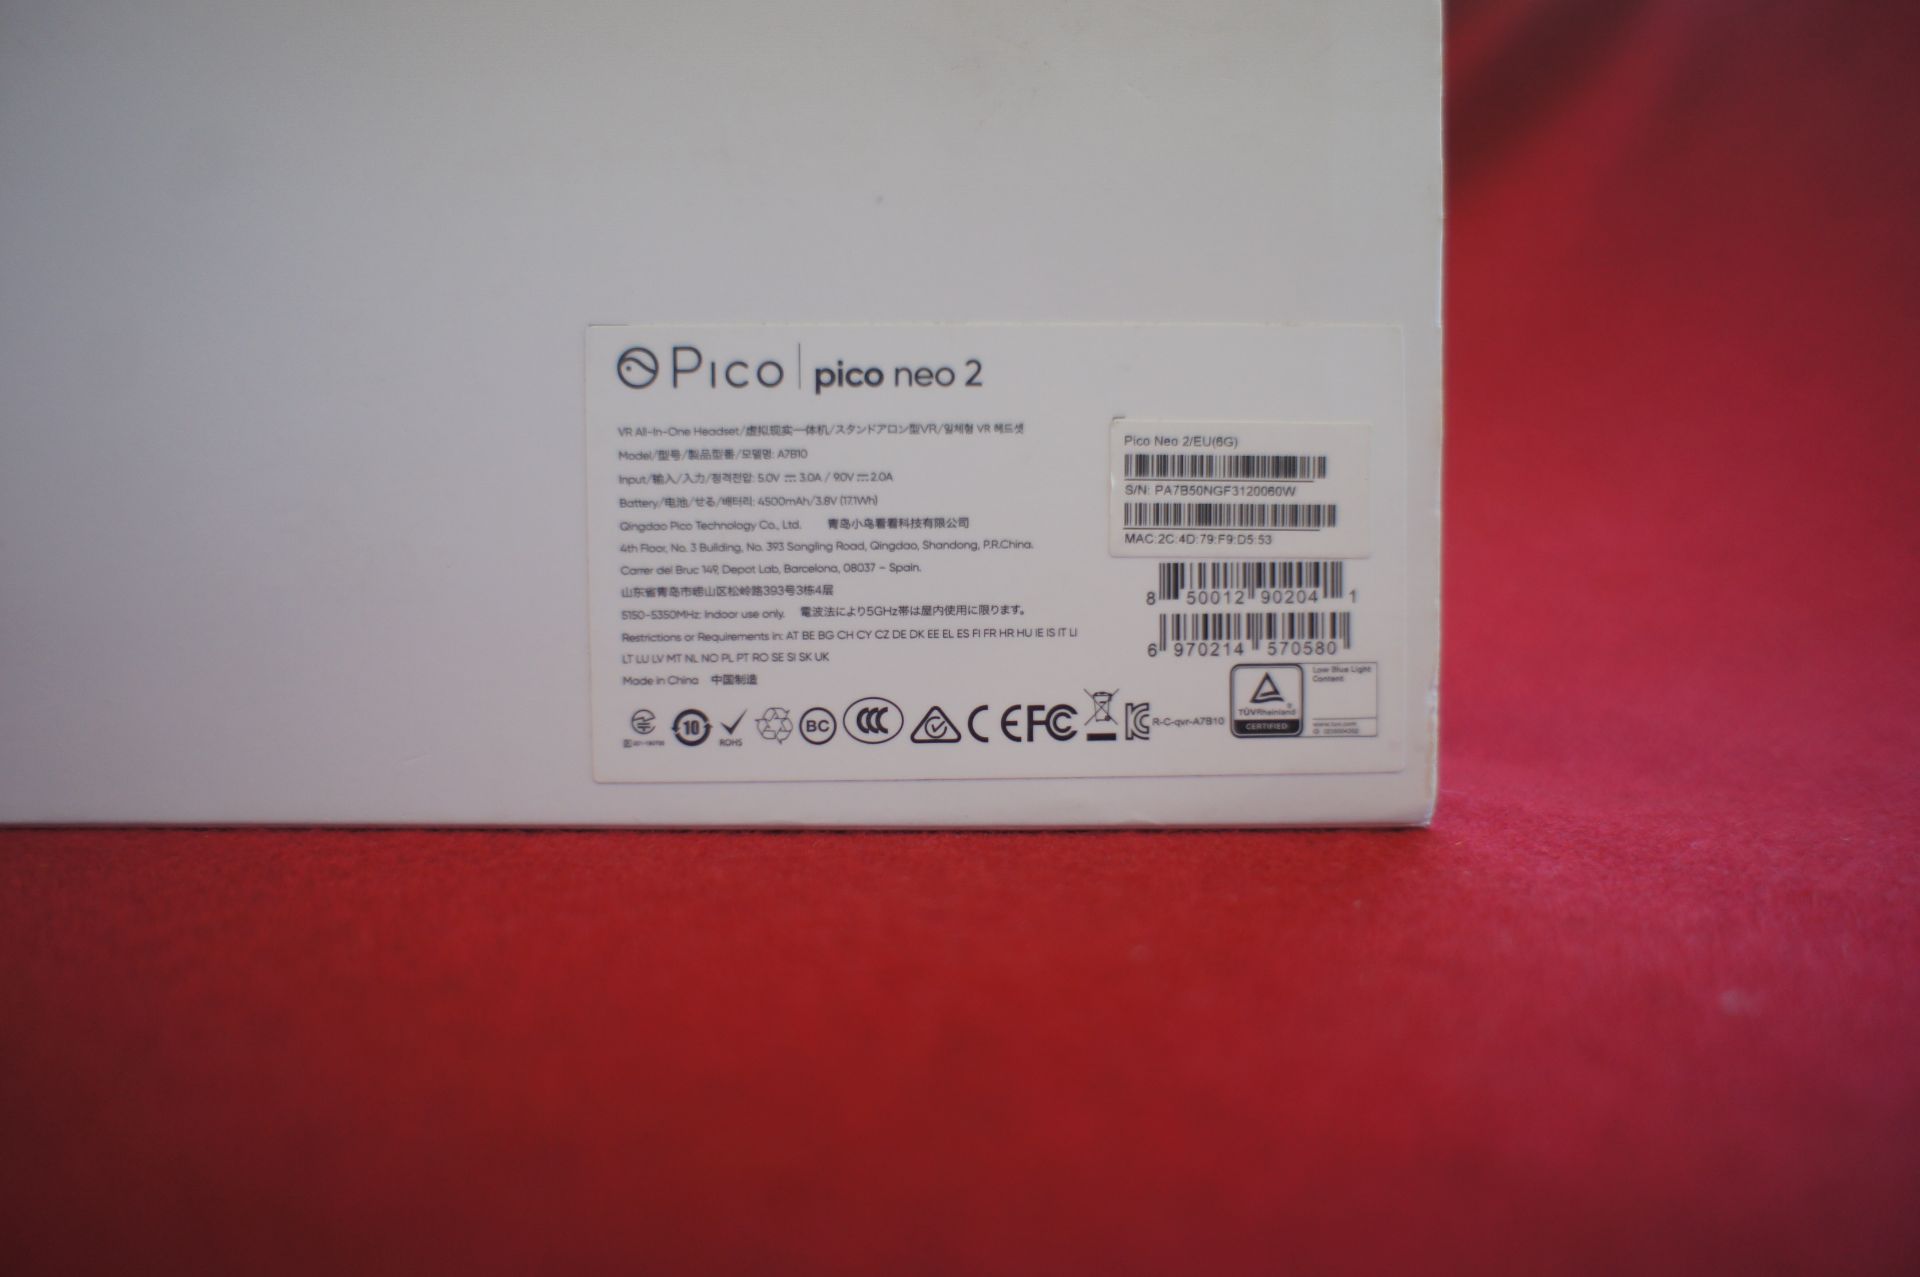 Pico Neo 2 VR headset, Asset Number D10, S/N PA7B5 - Image 2 of 3